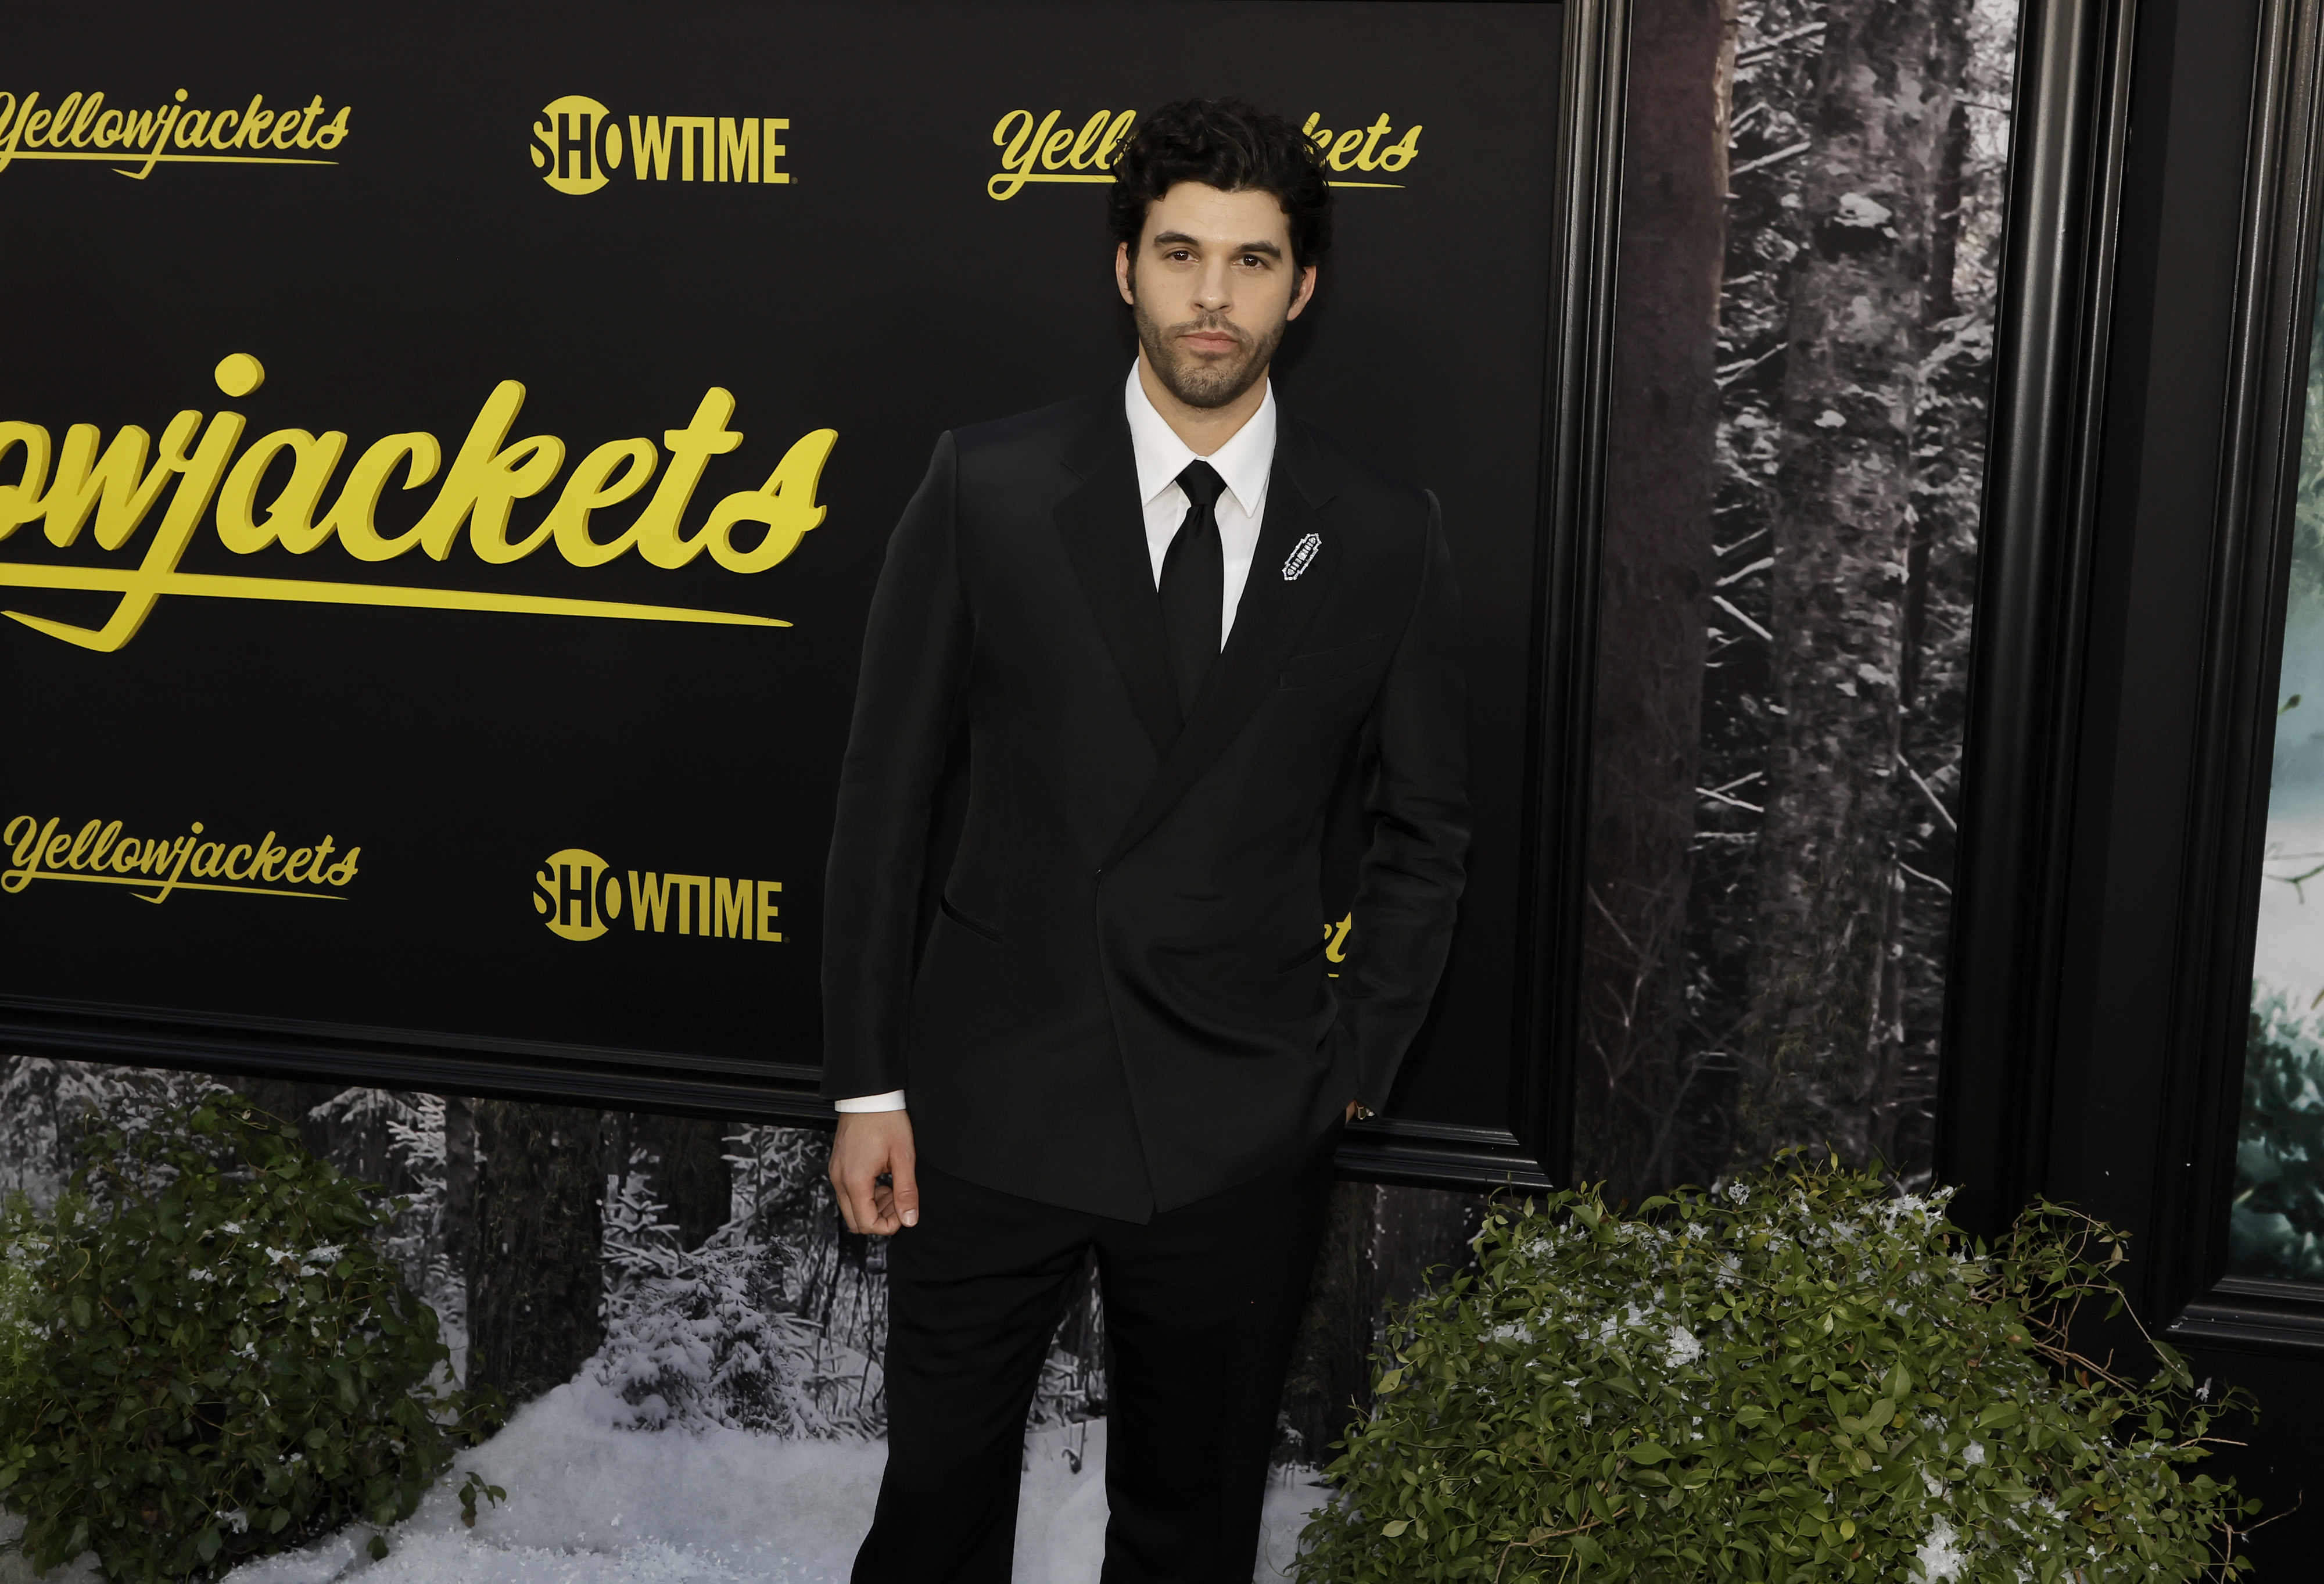 Steven Krueger attends the World Premiere of Season Two of Showtime's "Yellowjackets" at TCL Chinese Theatre on March 22, 2023, in Hollywood, California. | Source: Getty Images